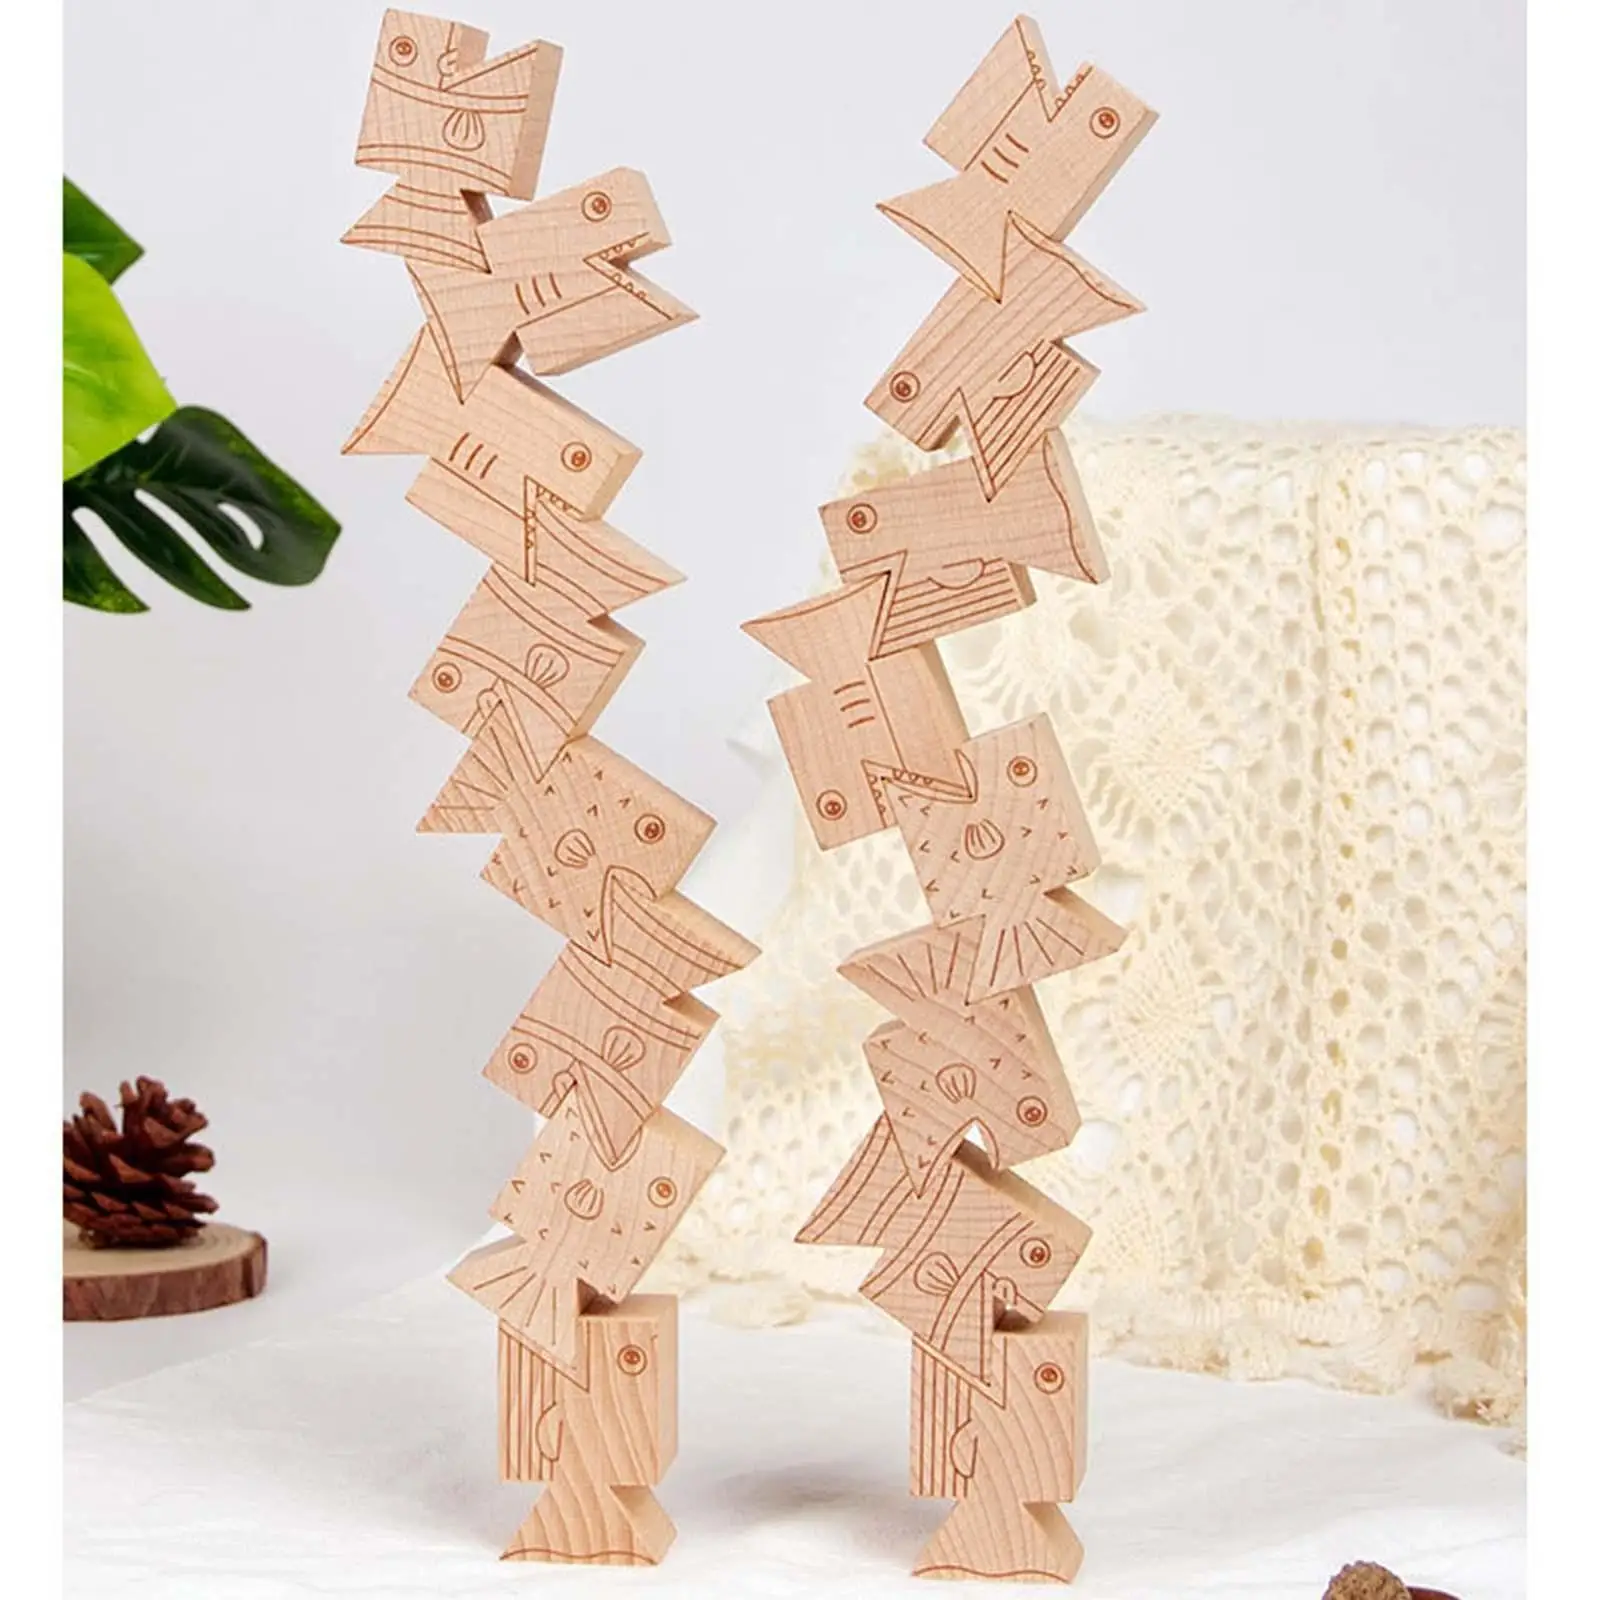 16Pcs Wooden Stacking Blocks Building Blocks for Kids Early Educational Toy